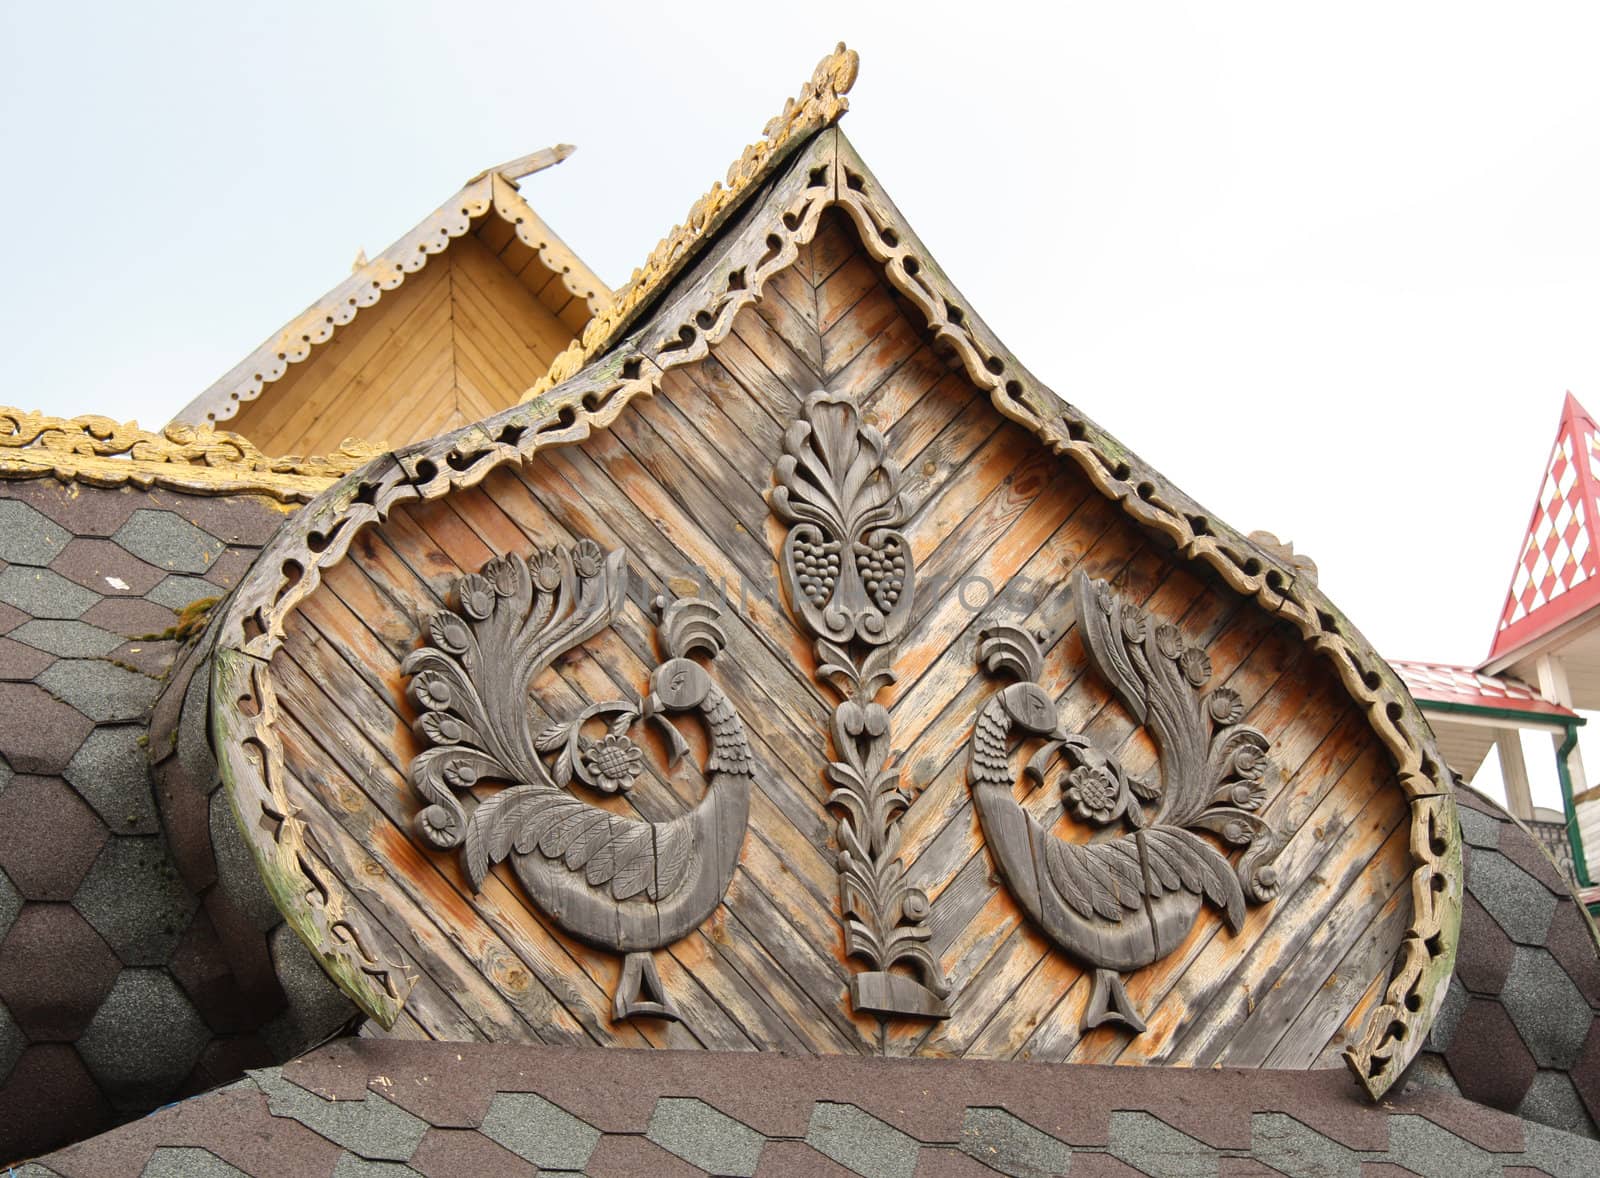 Traditional wooden Russian architecture with carved birds decoration